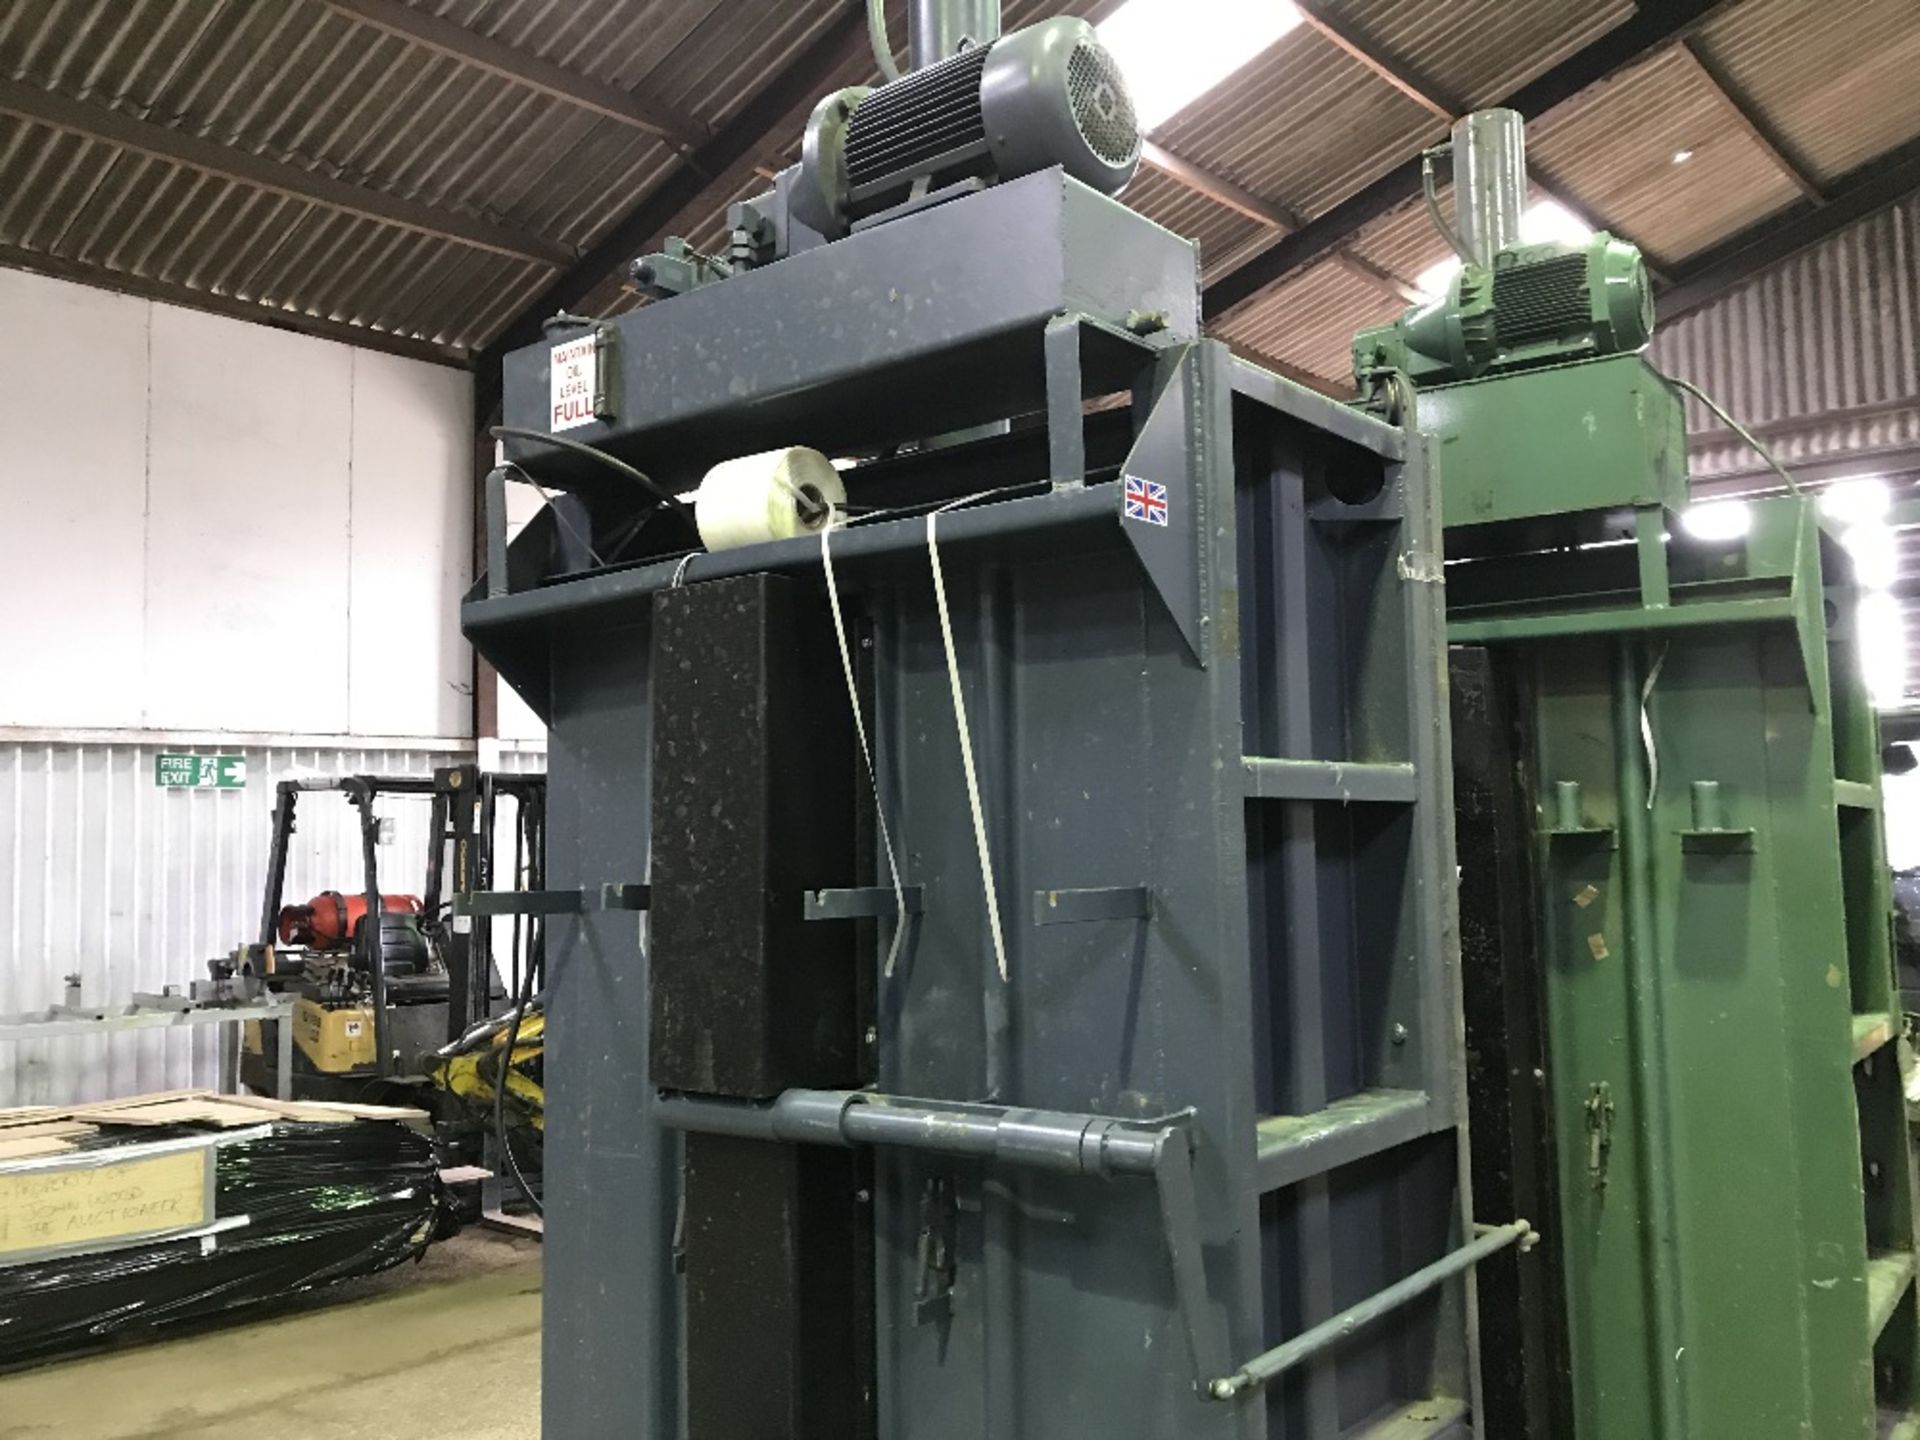 DICOM HEAVY DUTY WASTE BALER UNIT, DIRECT EX MAJOR COMPANY LIQUIDATION, REMOVED FROM A WORKING - Image 4 of 4